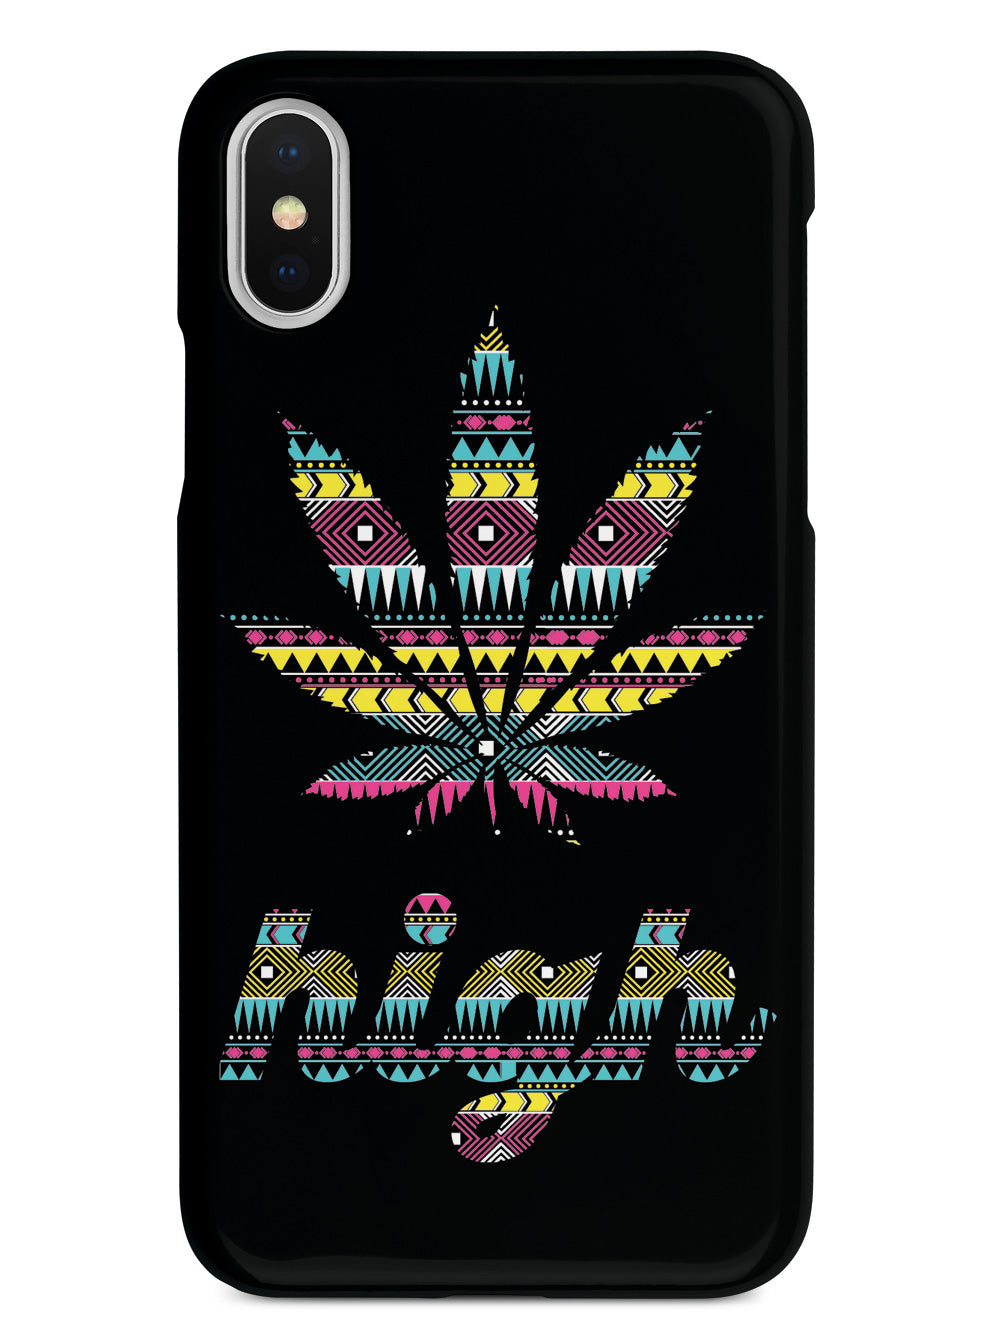 High - Colorful Aztec Pattern Case